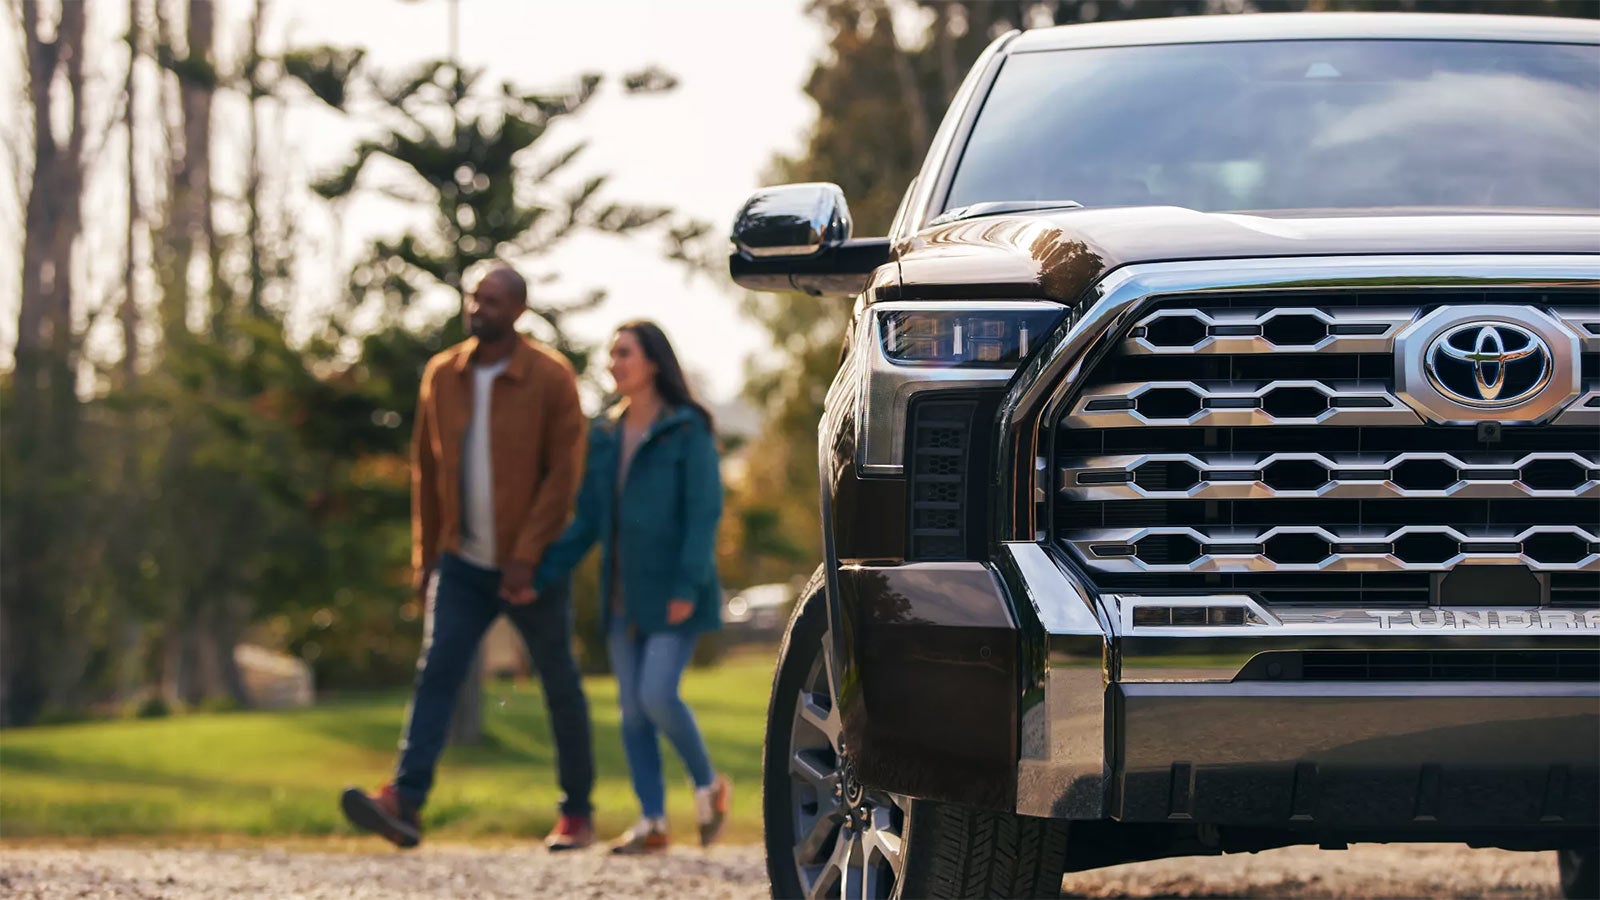 2022 Toyota Tundra Gallery | All Star Toyota of Baton Rouge in Baton Rouge LA